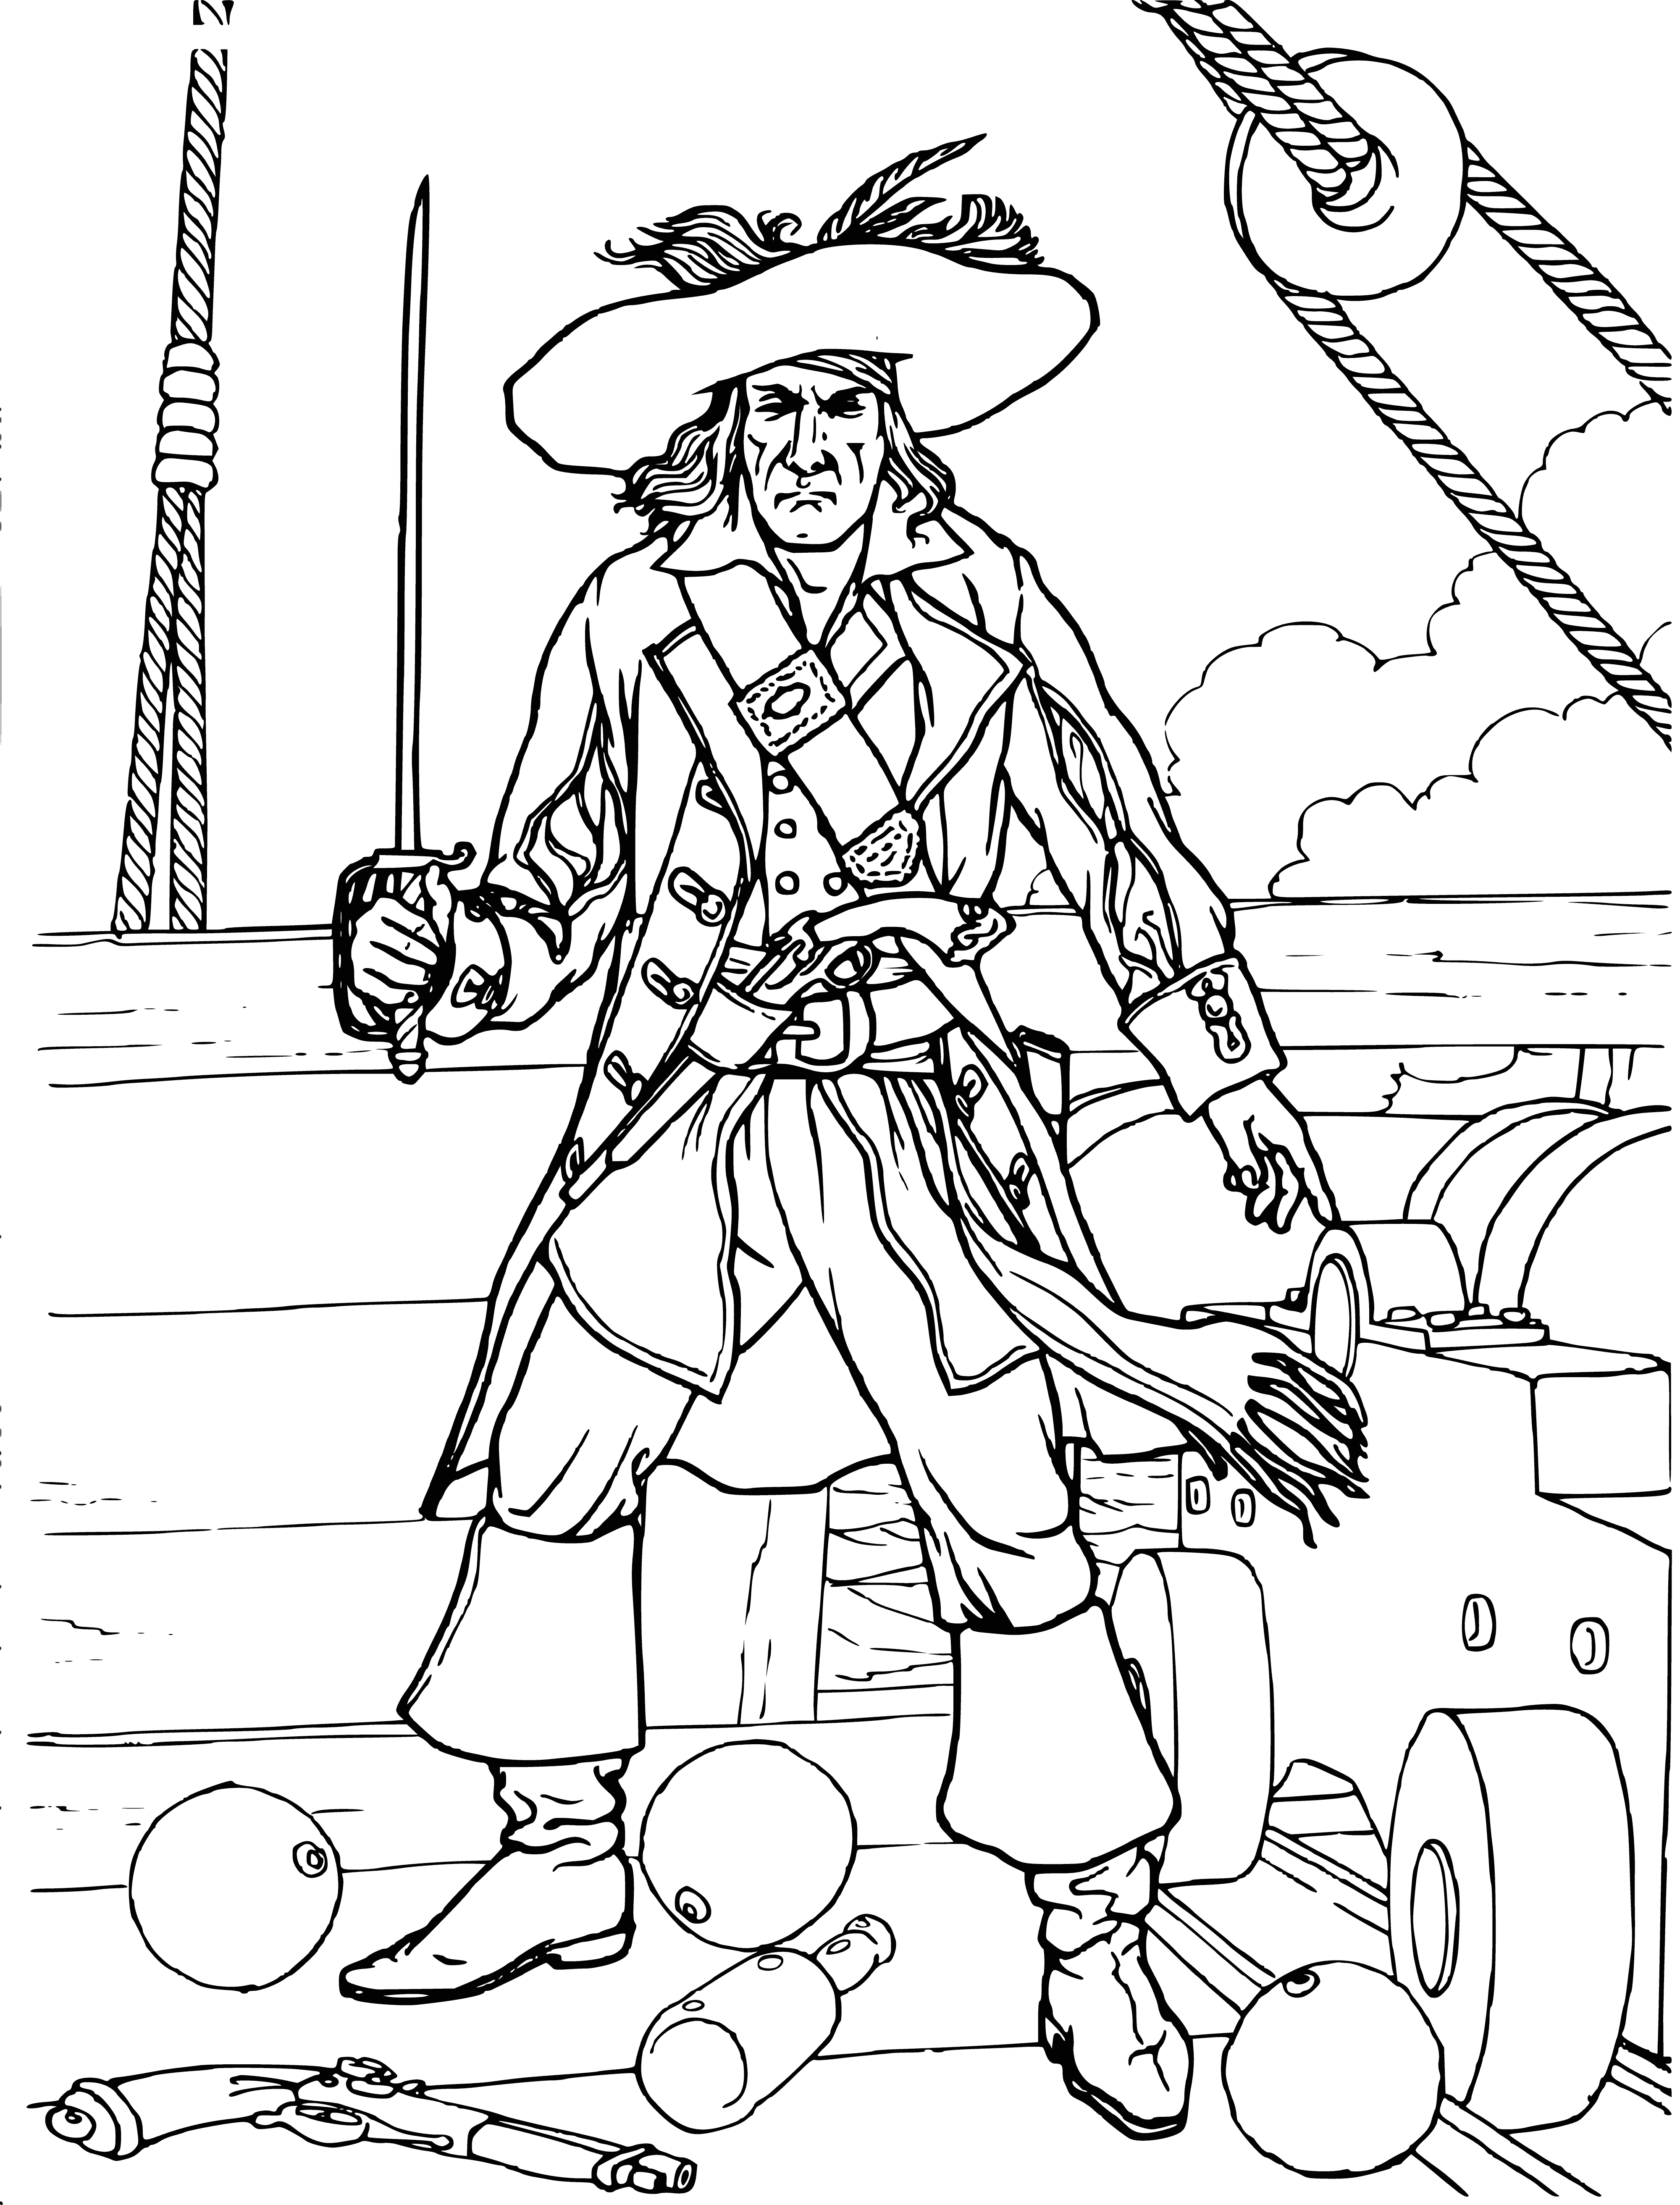 Pirate in battle coloring page